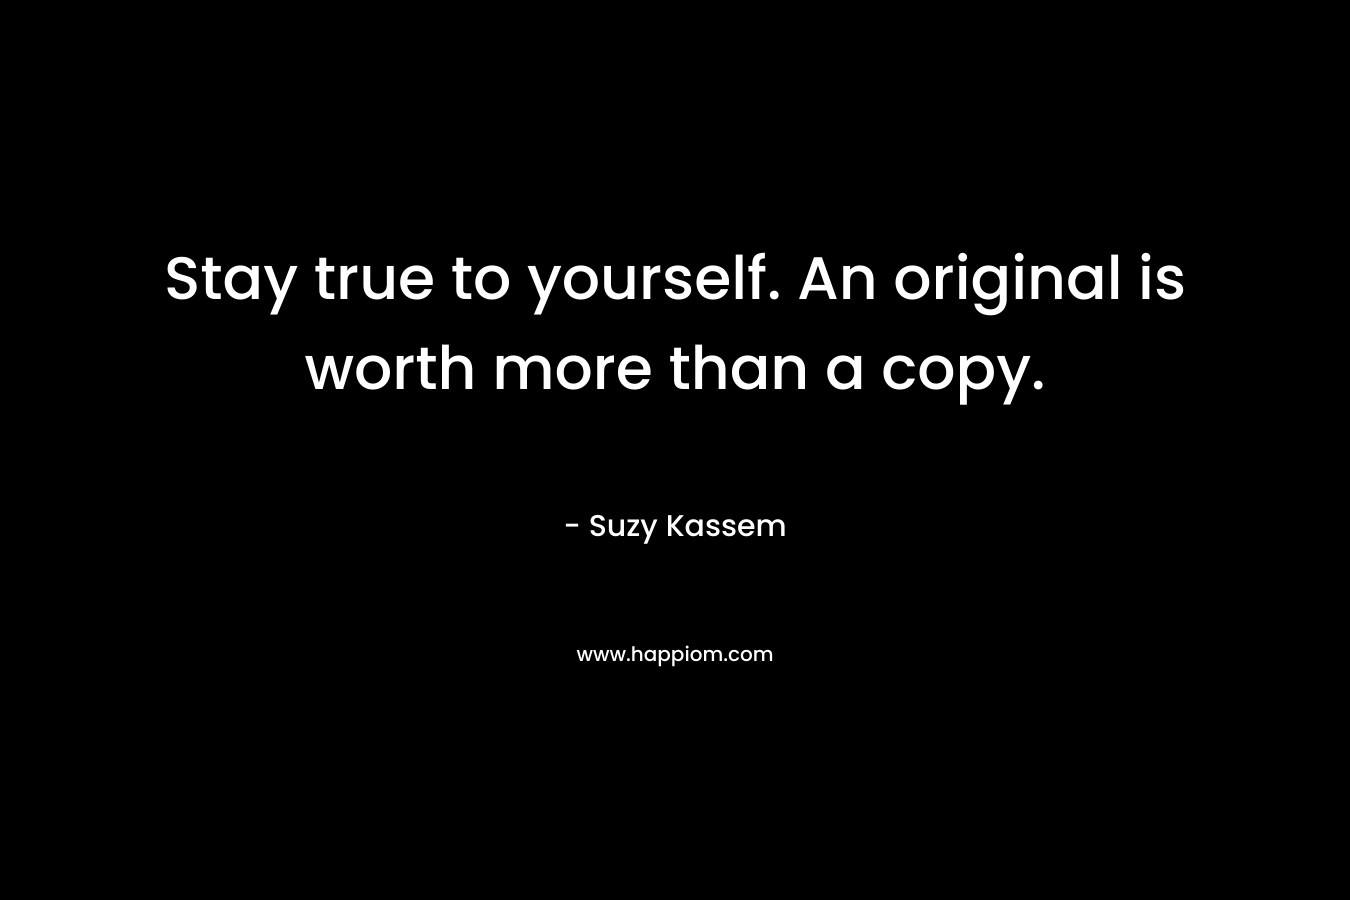 Stay true to yourself. An original is worth more than a copy.